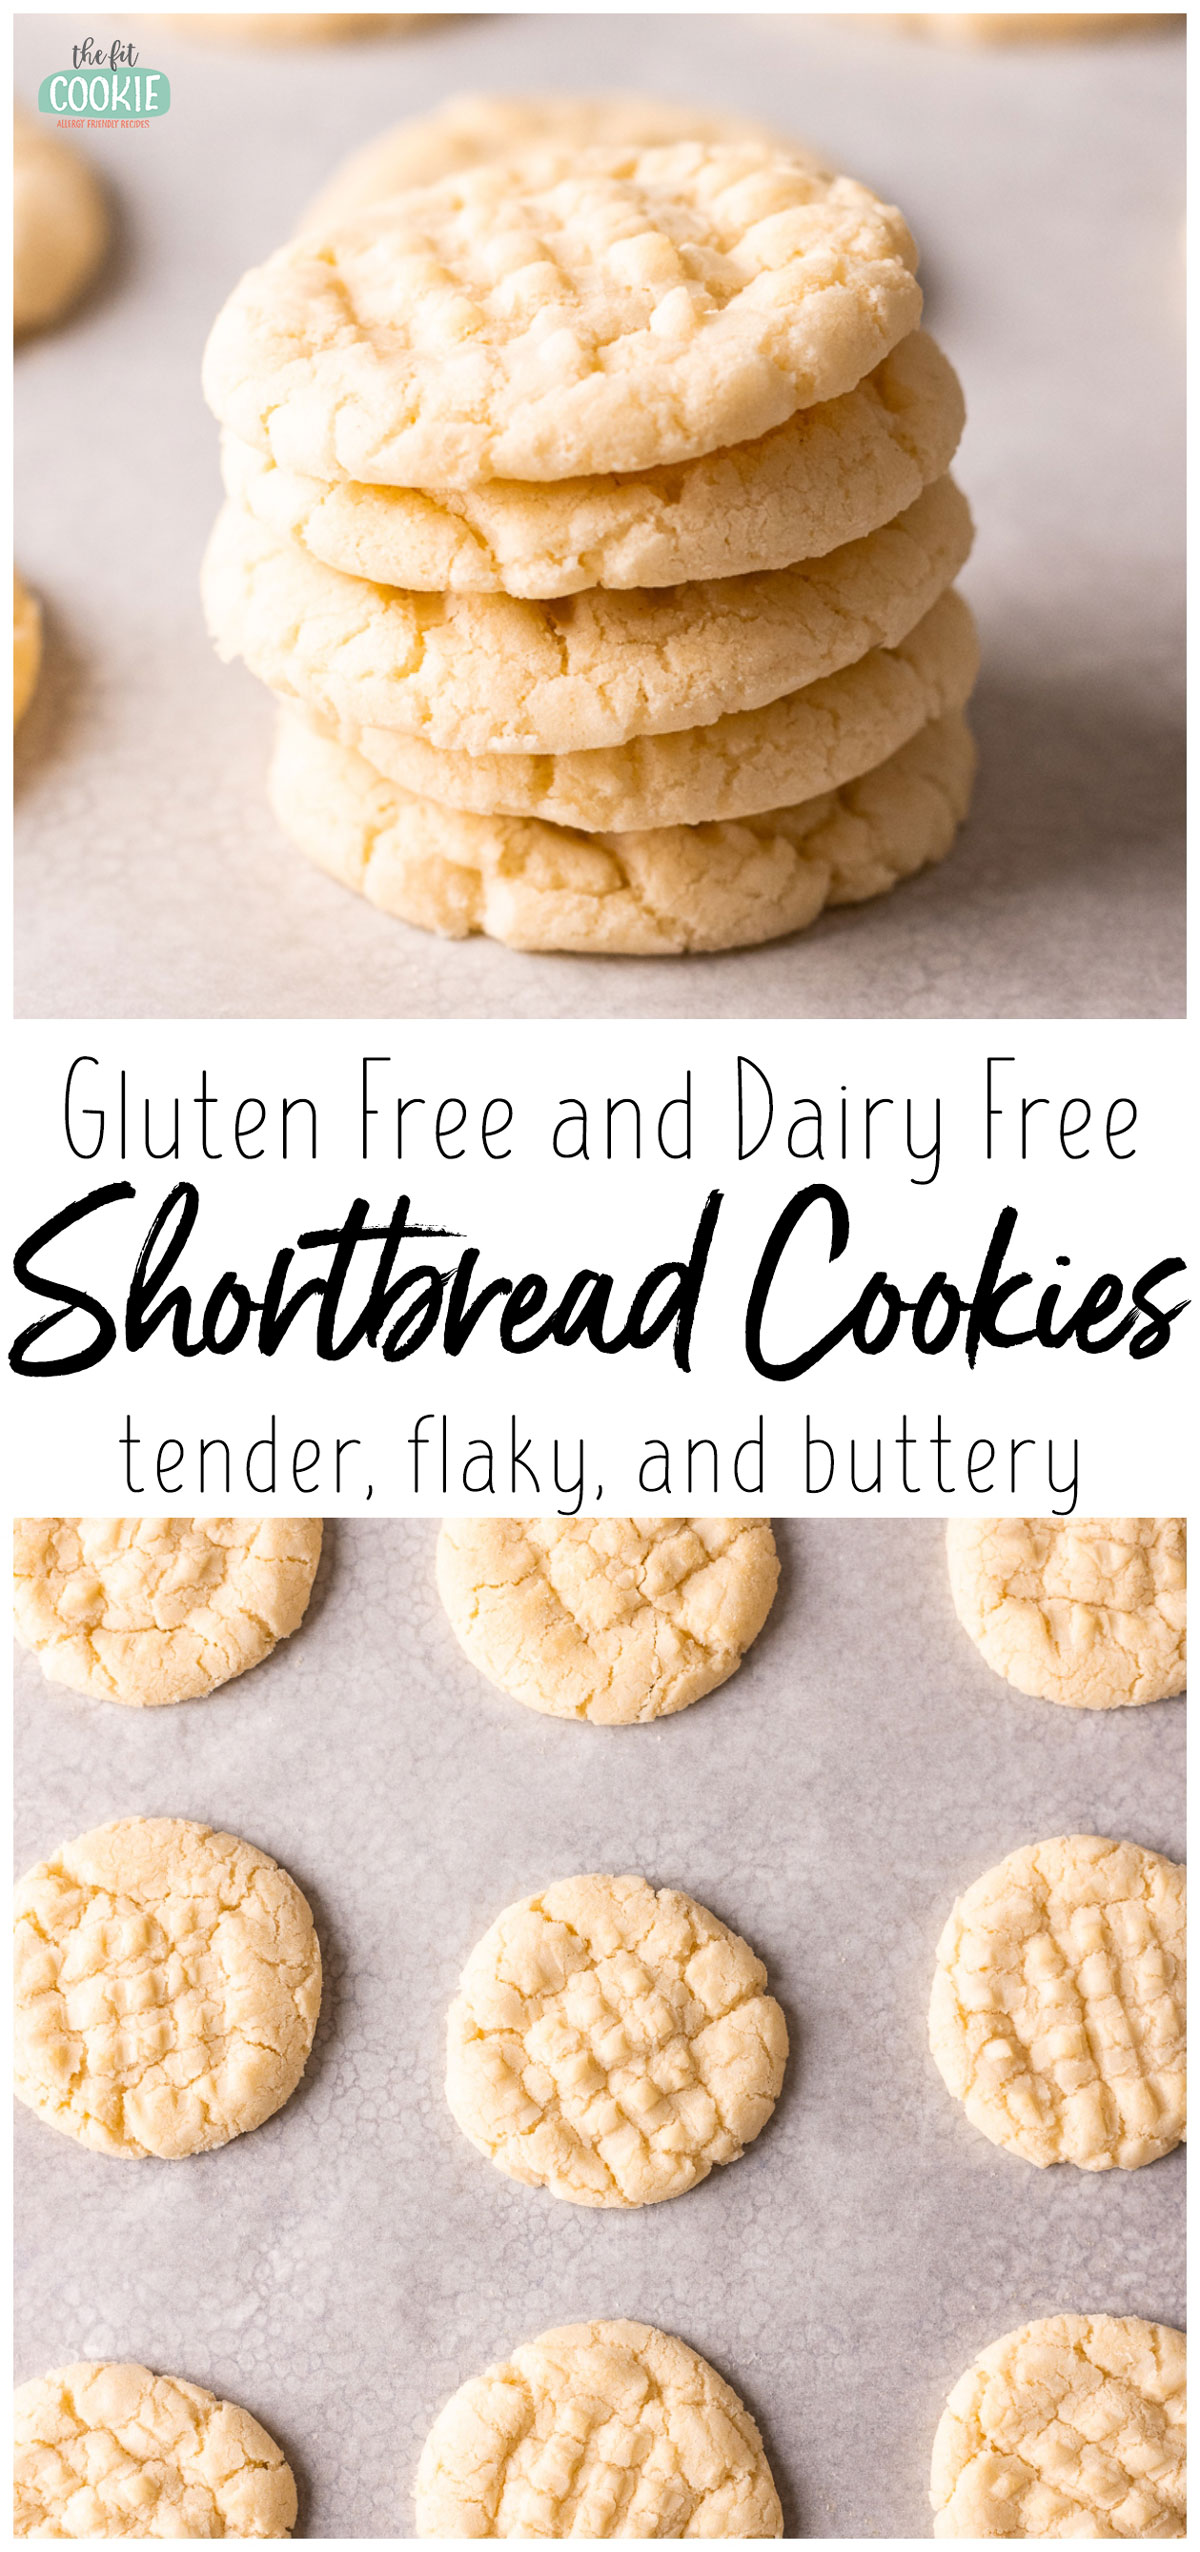 photo collage of Gluten free shortbread cookies with text overlay.